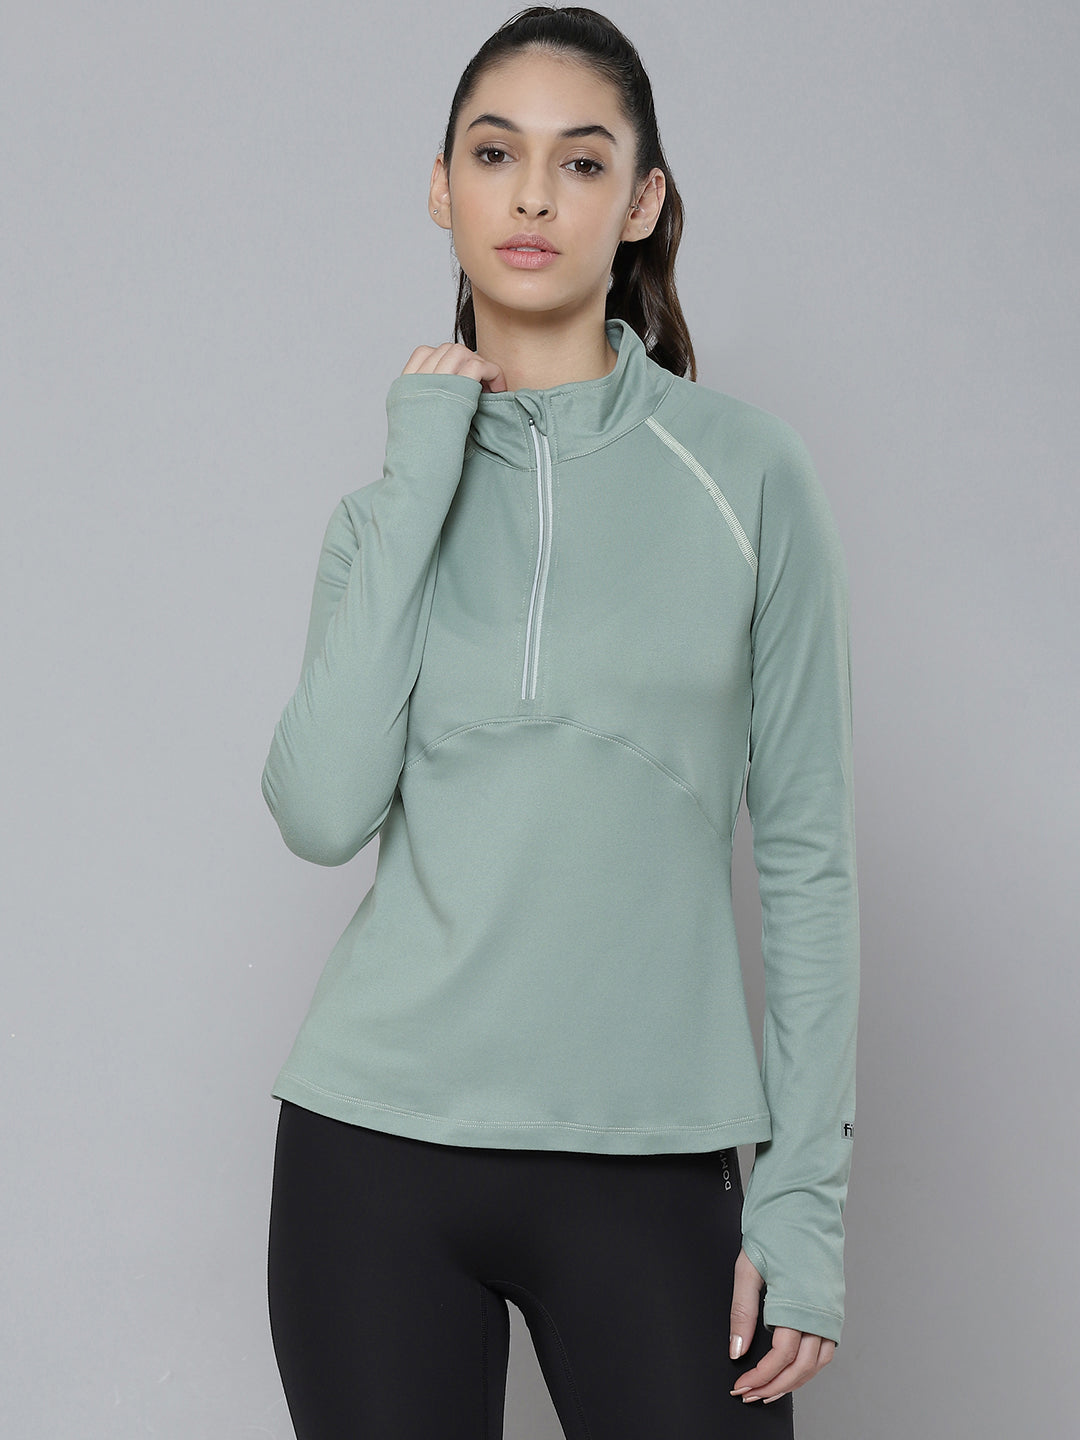 Women's Green High Neck Training or Gym T-shirt – Fitkin